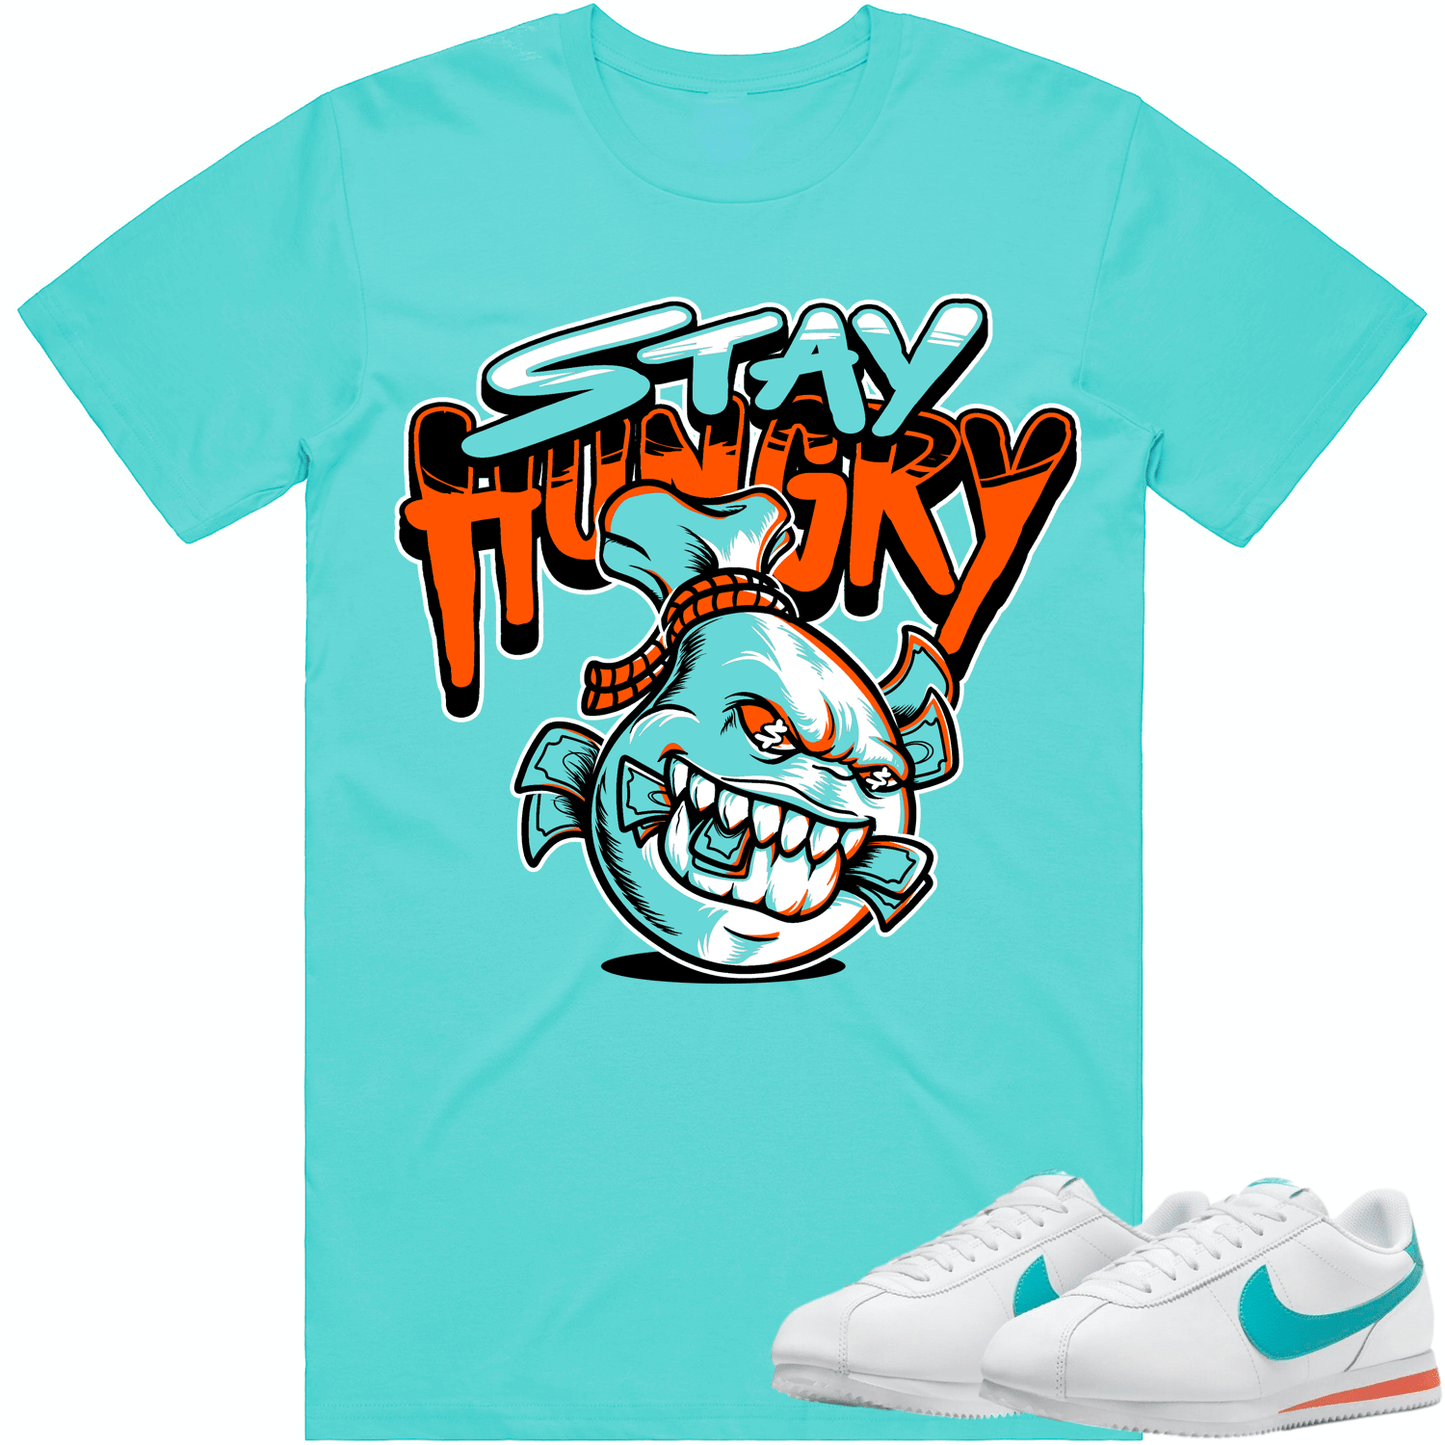 Miami Cortez Dolphins Shirt - Cortez Sneaker Tees - Stay Hungry